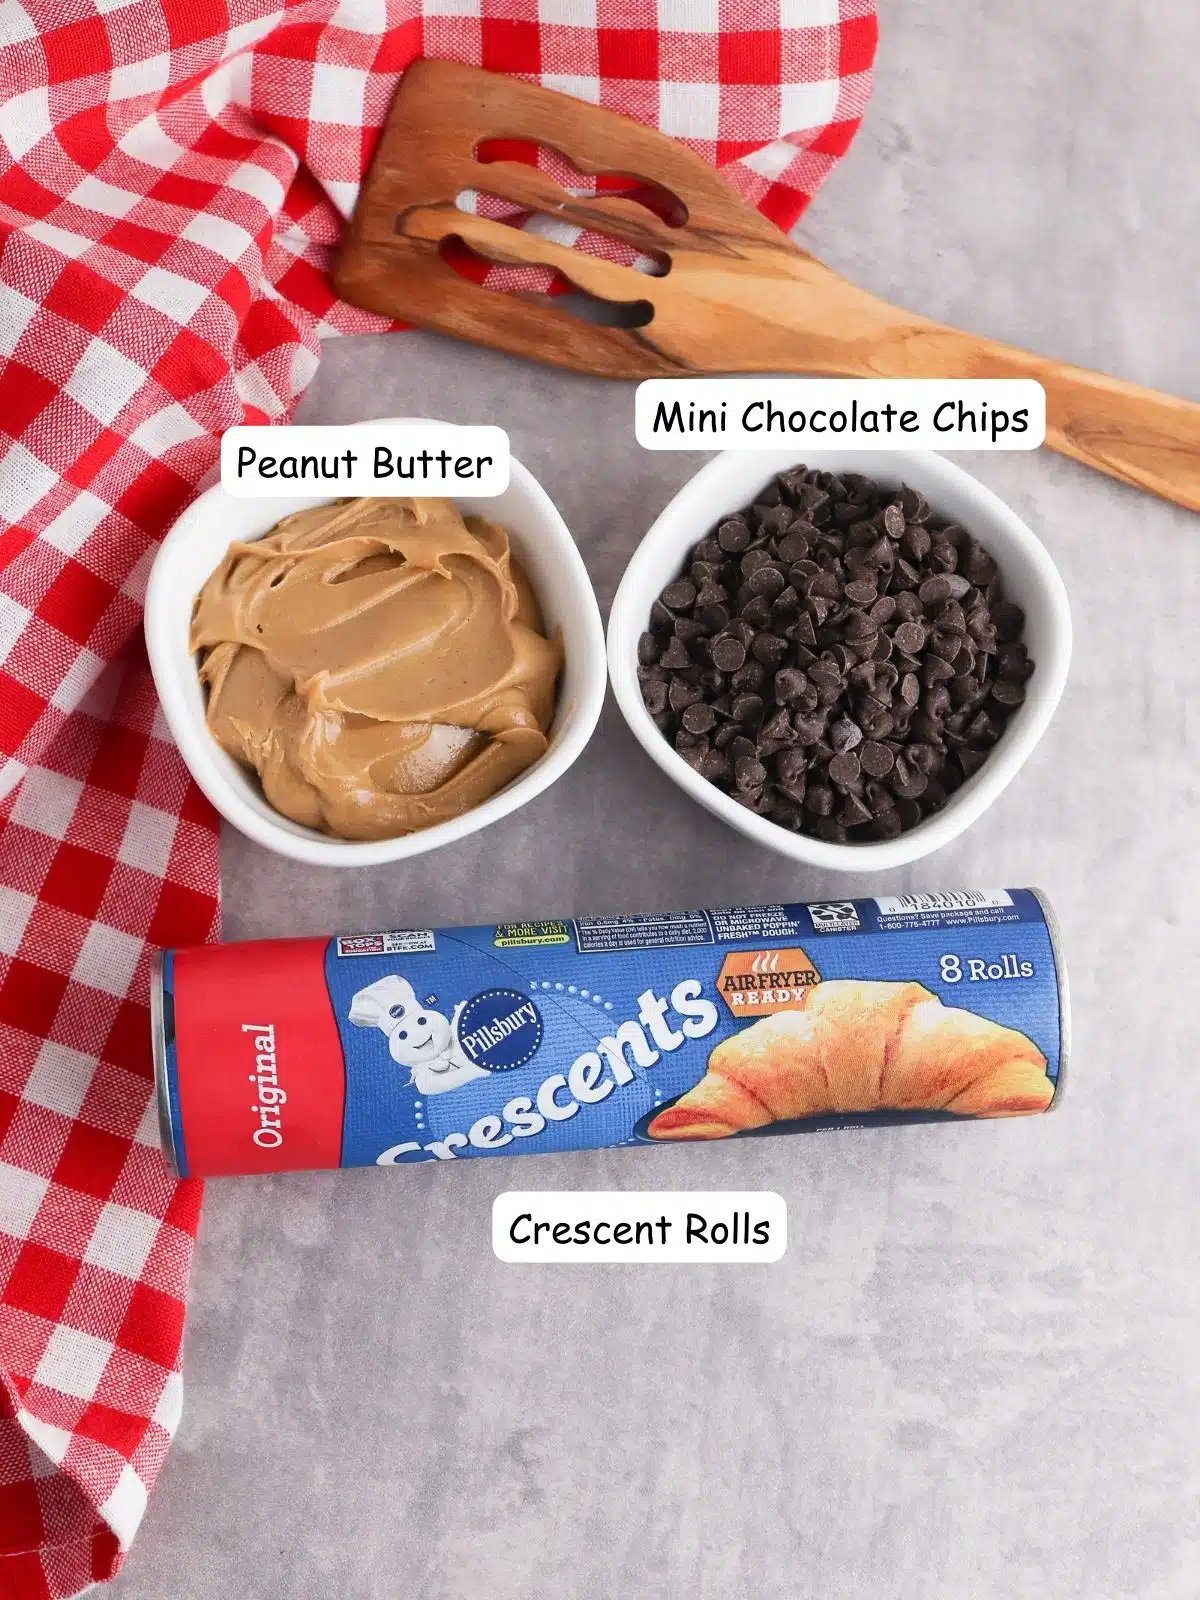 ingredients - peanut butter in small bowl, chocolate chips in bowl and container of crescent rolls.